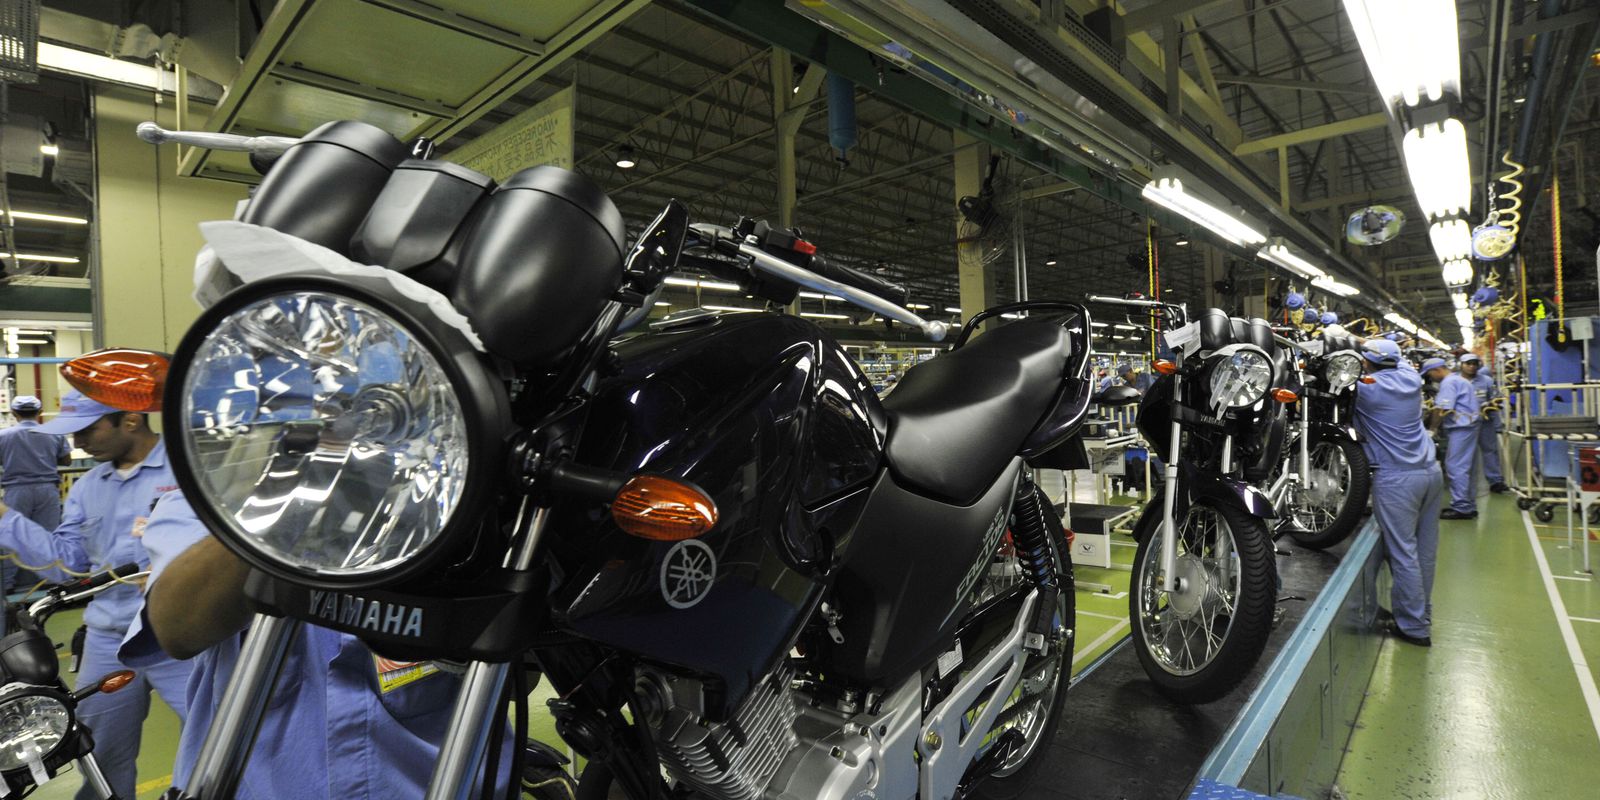 Abraciclo estimates production of 1.29 million motorcycles this year